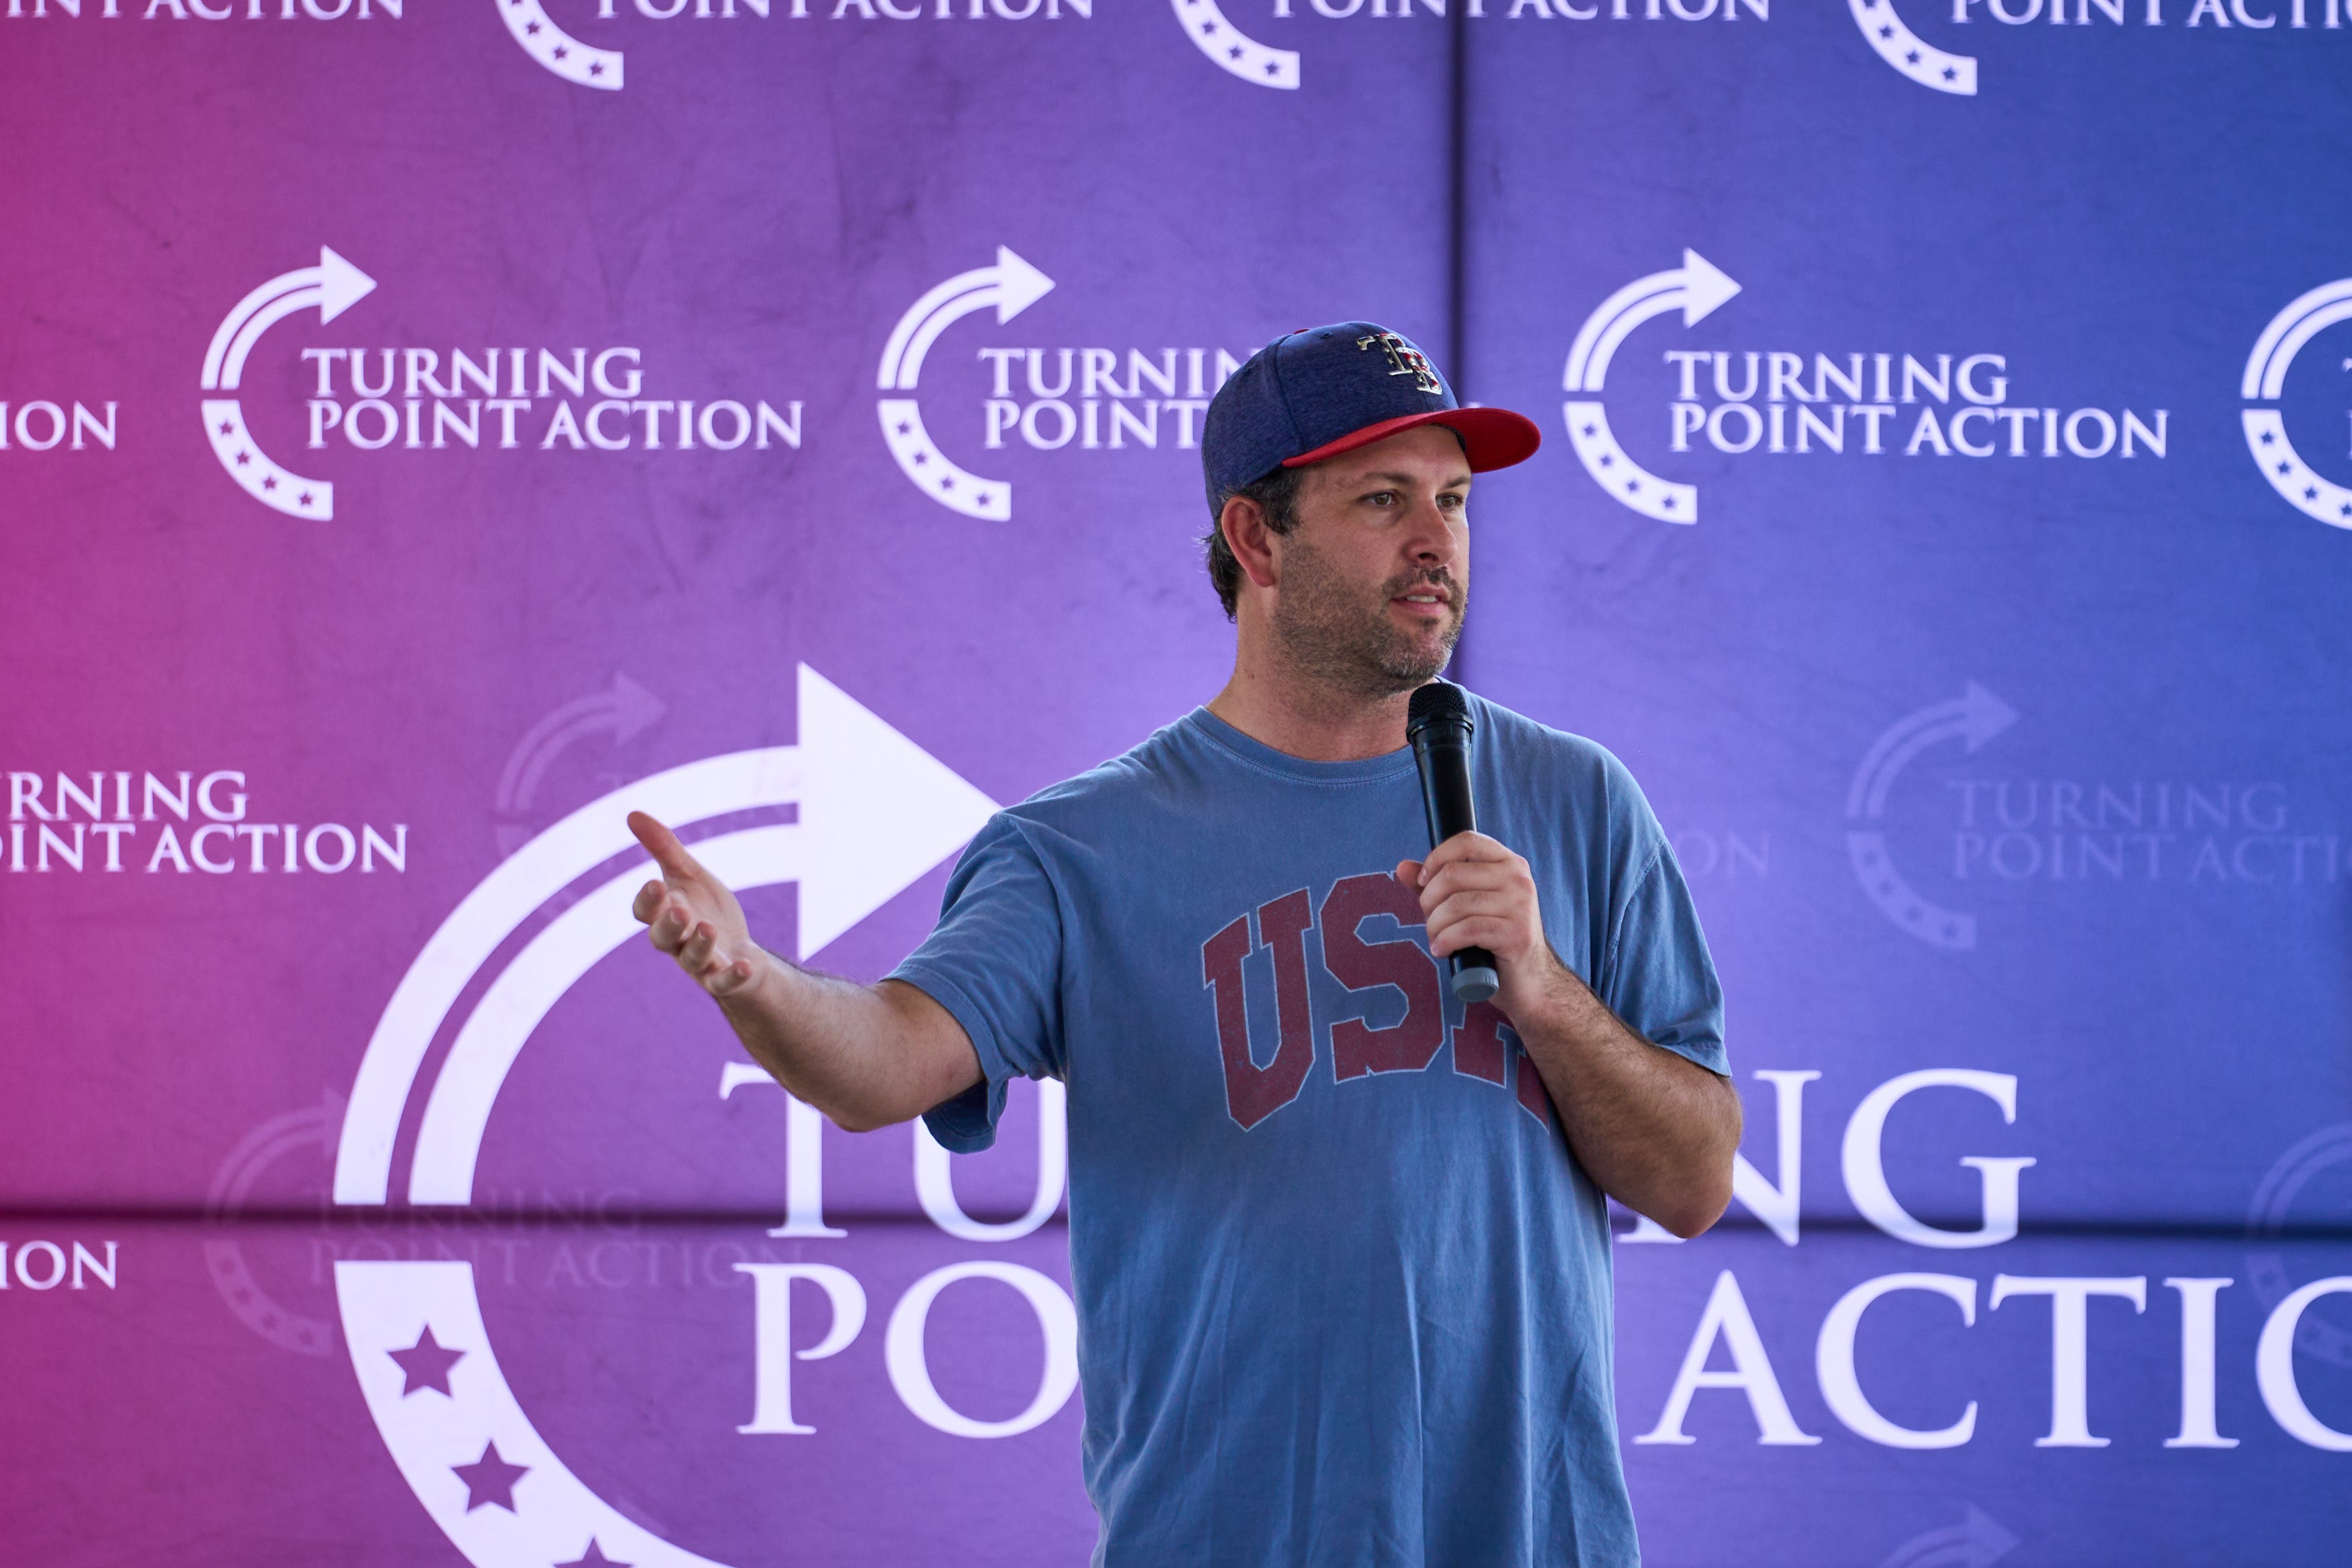 Tyler Bowyer, chief operating officer of Turning Point Action, speaks during the Turning Point Action event in Chandler on Aug. 27, 2022.